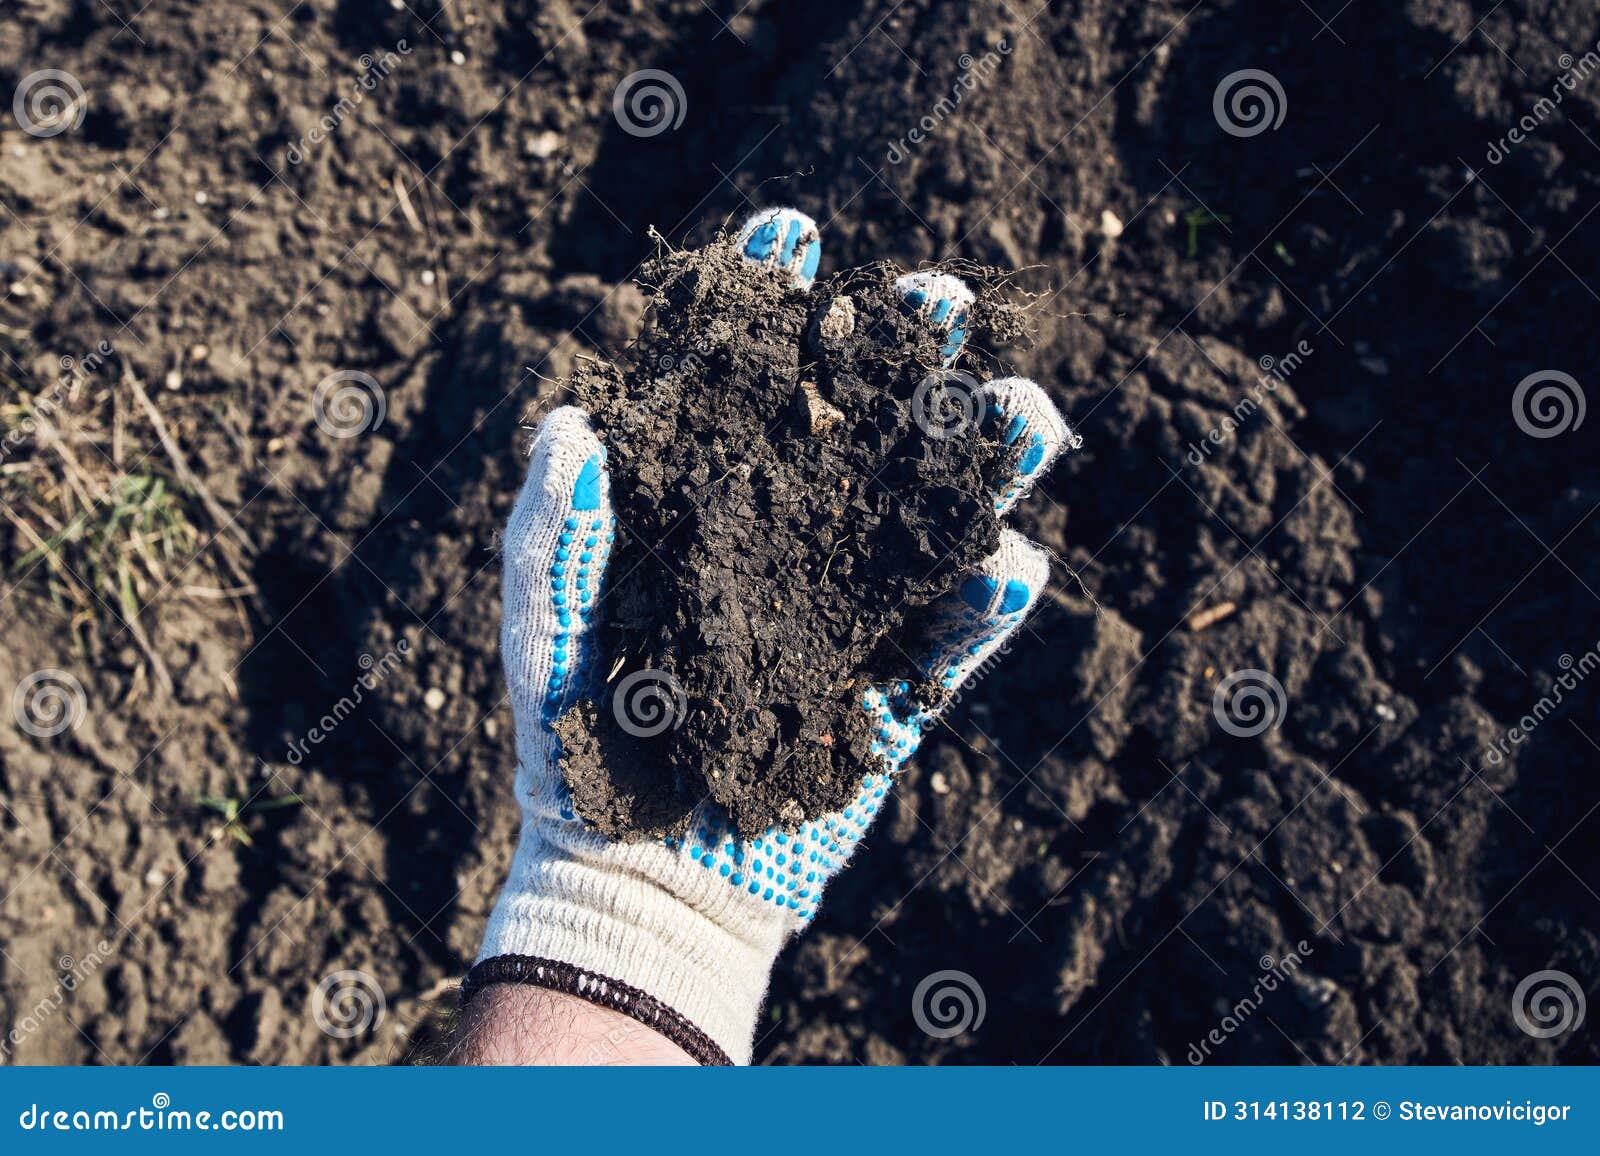 farmer agronomist holding a clod of earth, closeup of male hand with soil sample from agricultural field